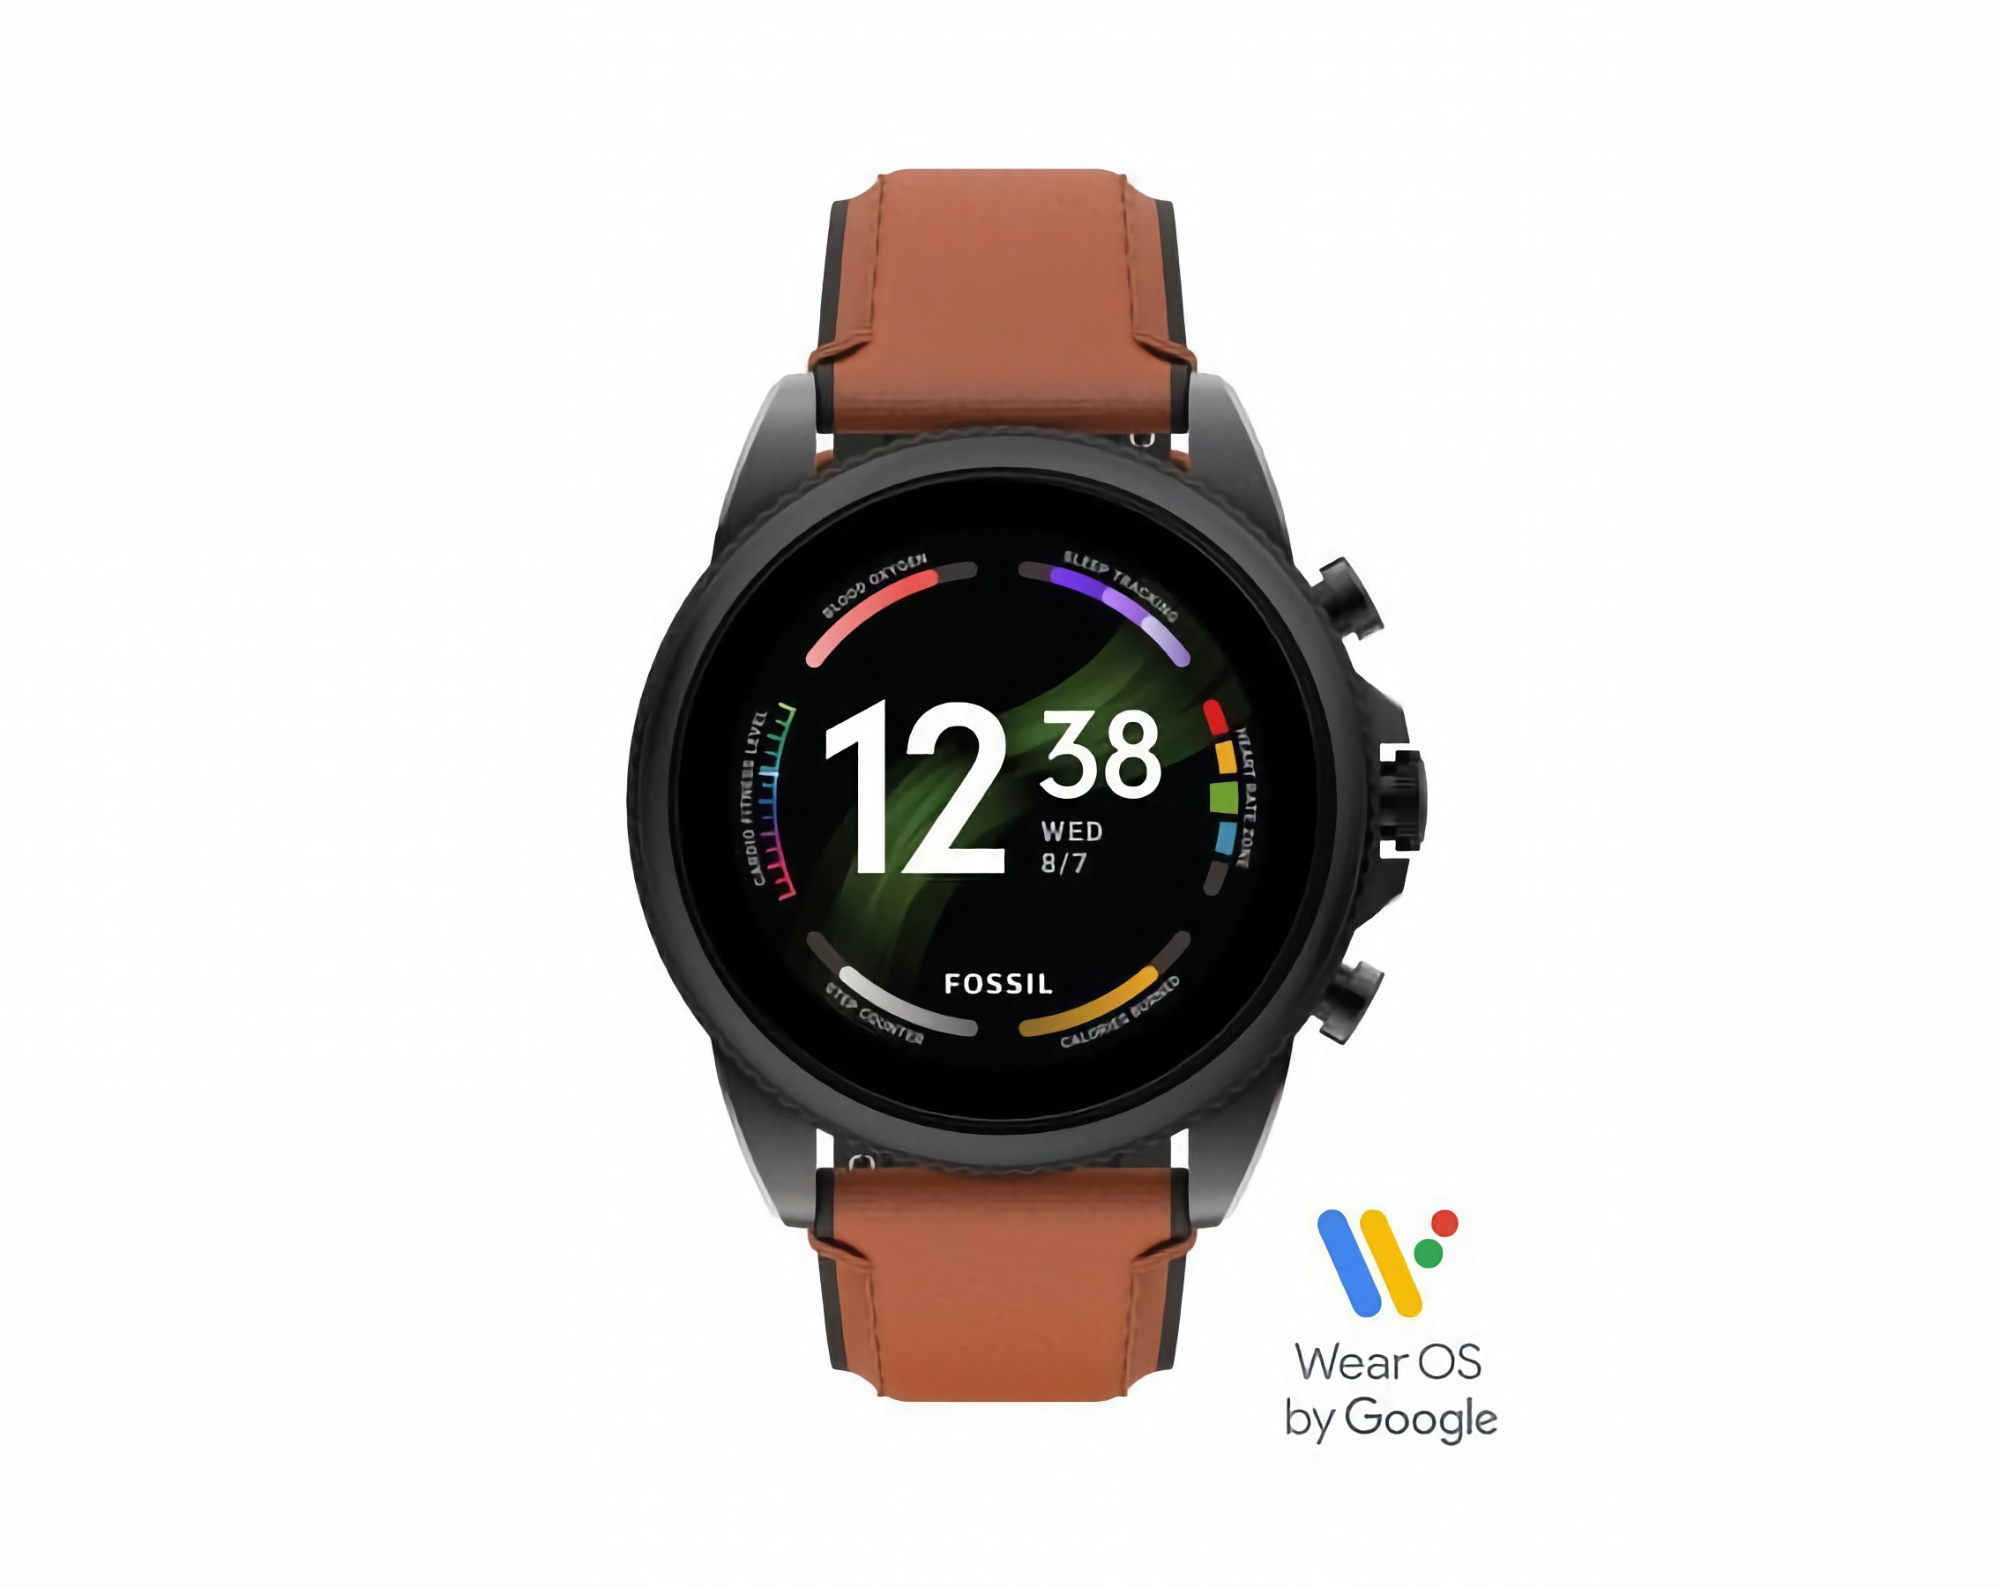 Amazon Big Spring Deal: Fossil Gen 6 with 44mm case, NFC and Wear OS on board for $190 off